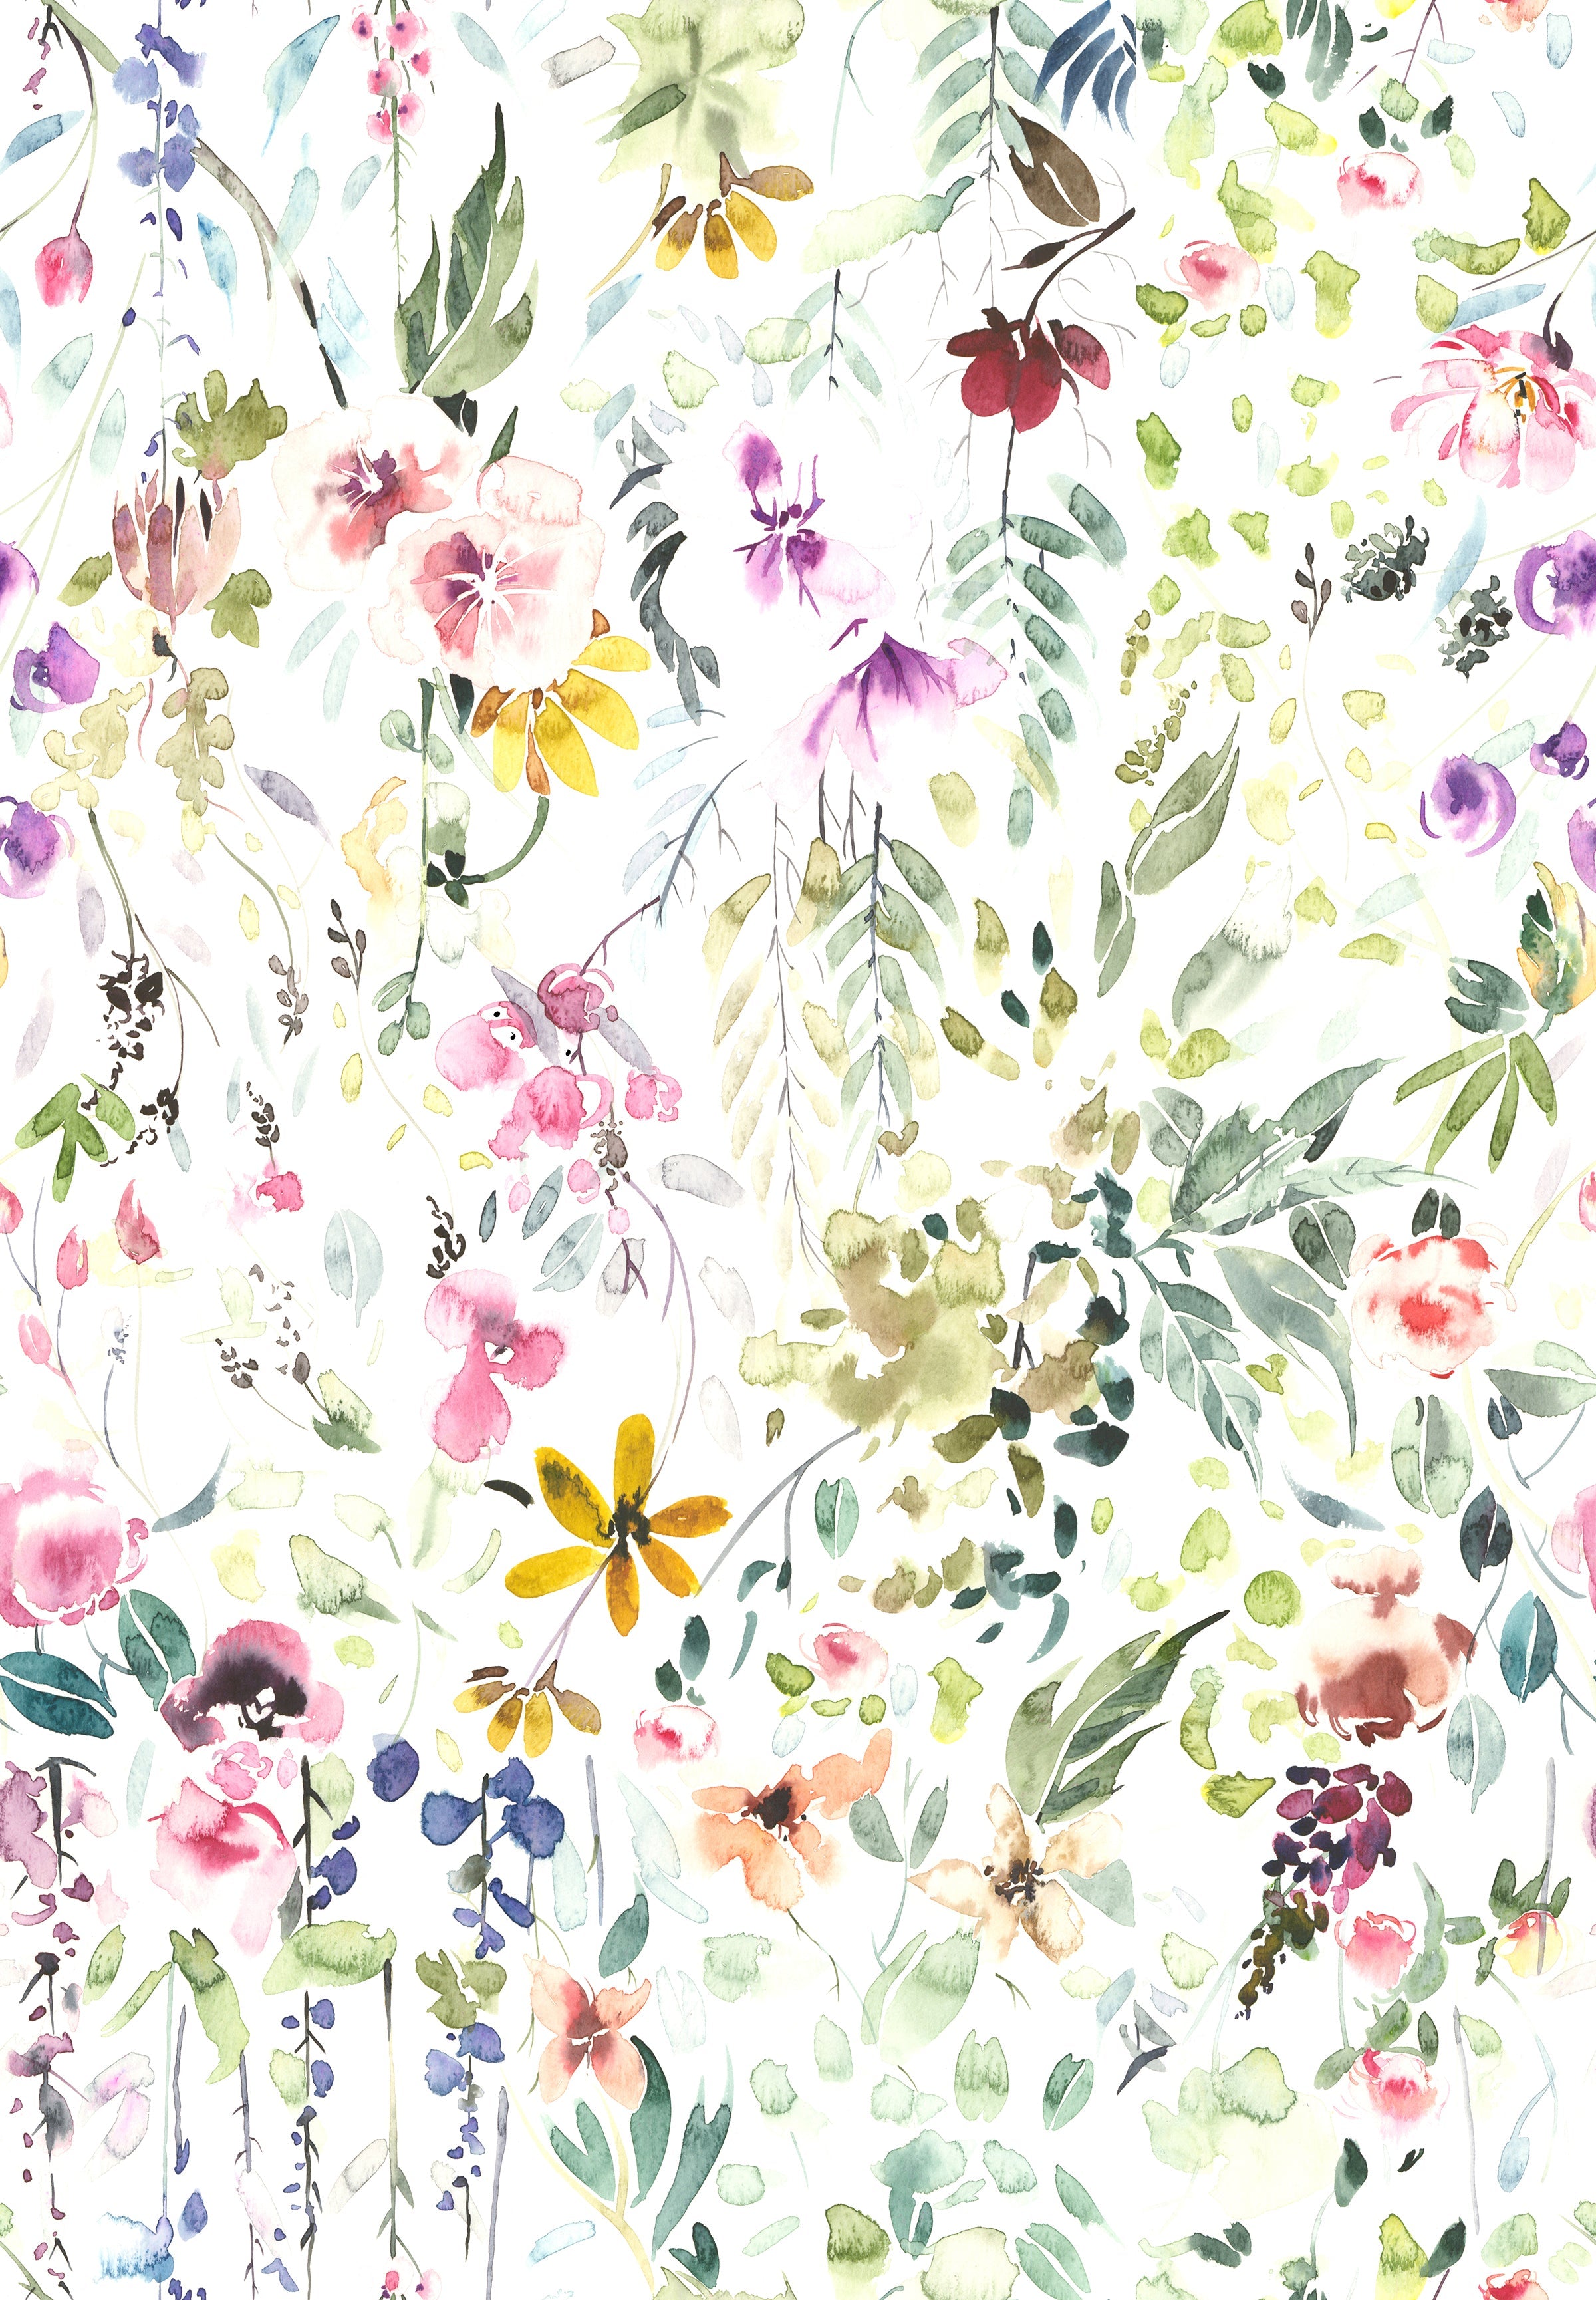 A detailed view of Hera's Floral Wallpaper featuring a rich and diverse array of watercolor flowers and leaves in a multitude of colors, including pinks, purples, yellows, and greens, creating a lively and inviting floral scene.